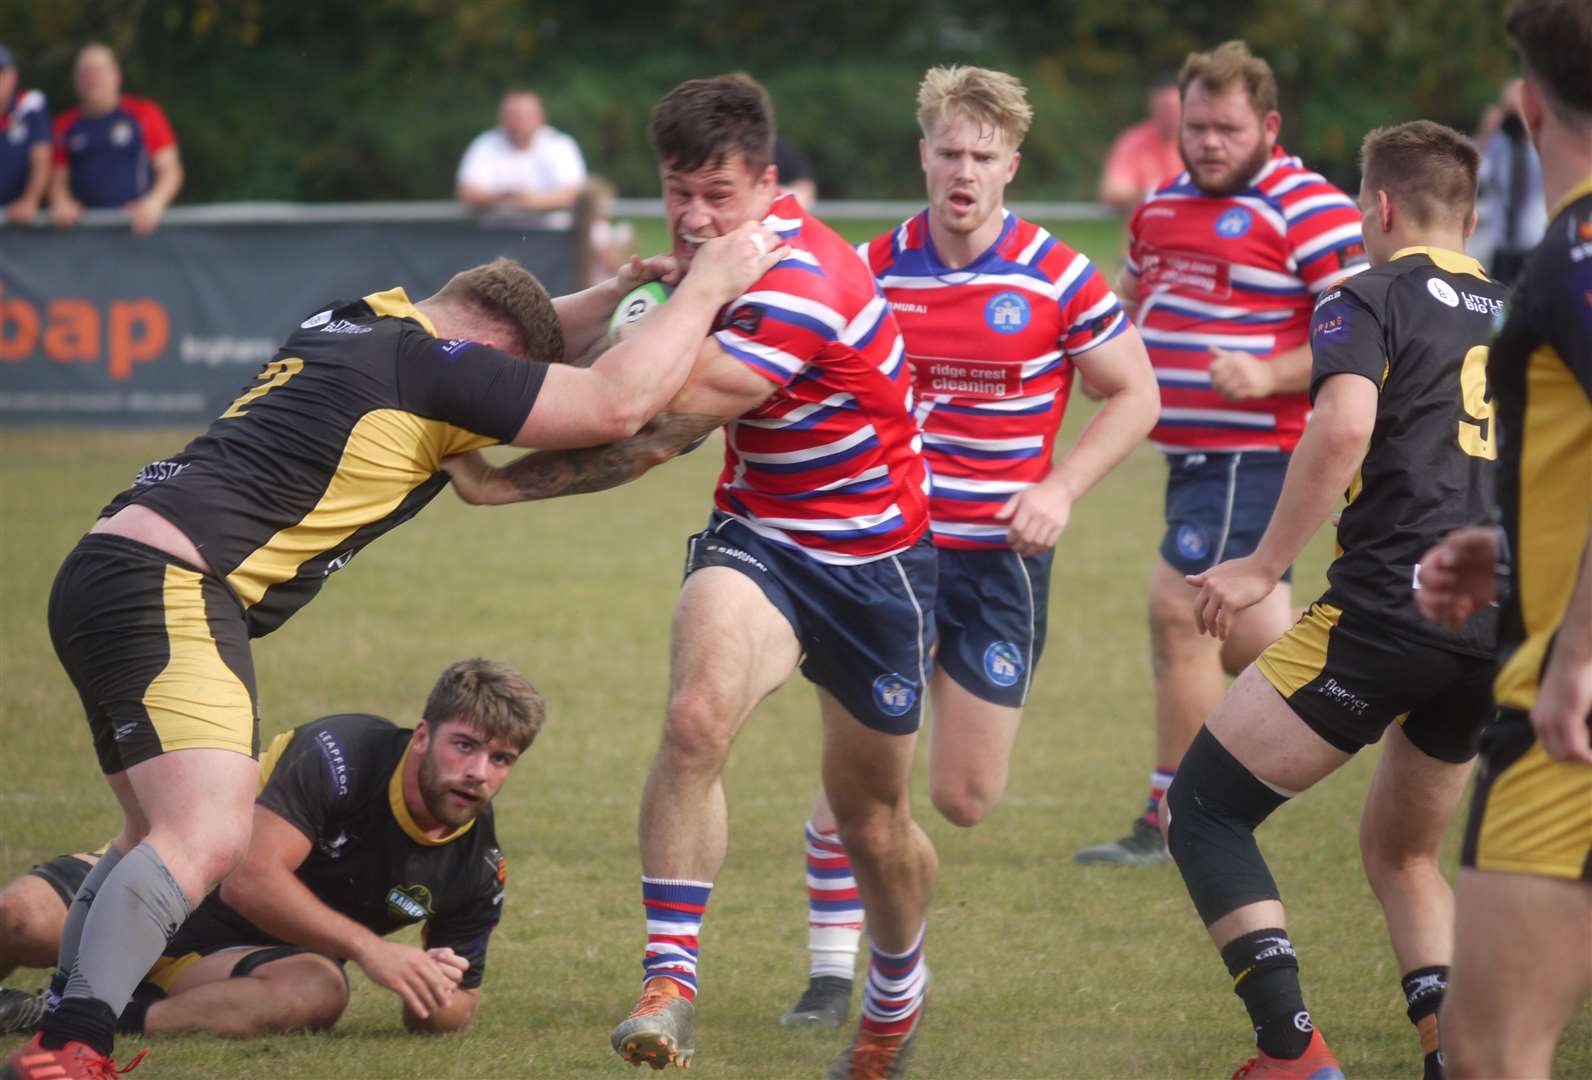 Shadyn Osgood powers forward for Tonbridge Juddians in Saturday’s win. Picture: Adam Hookway